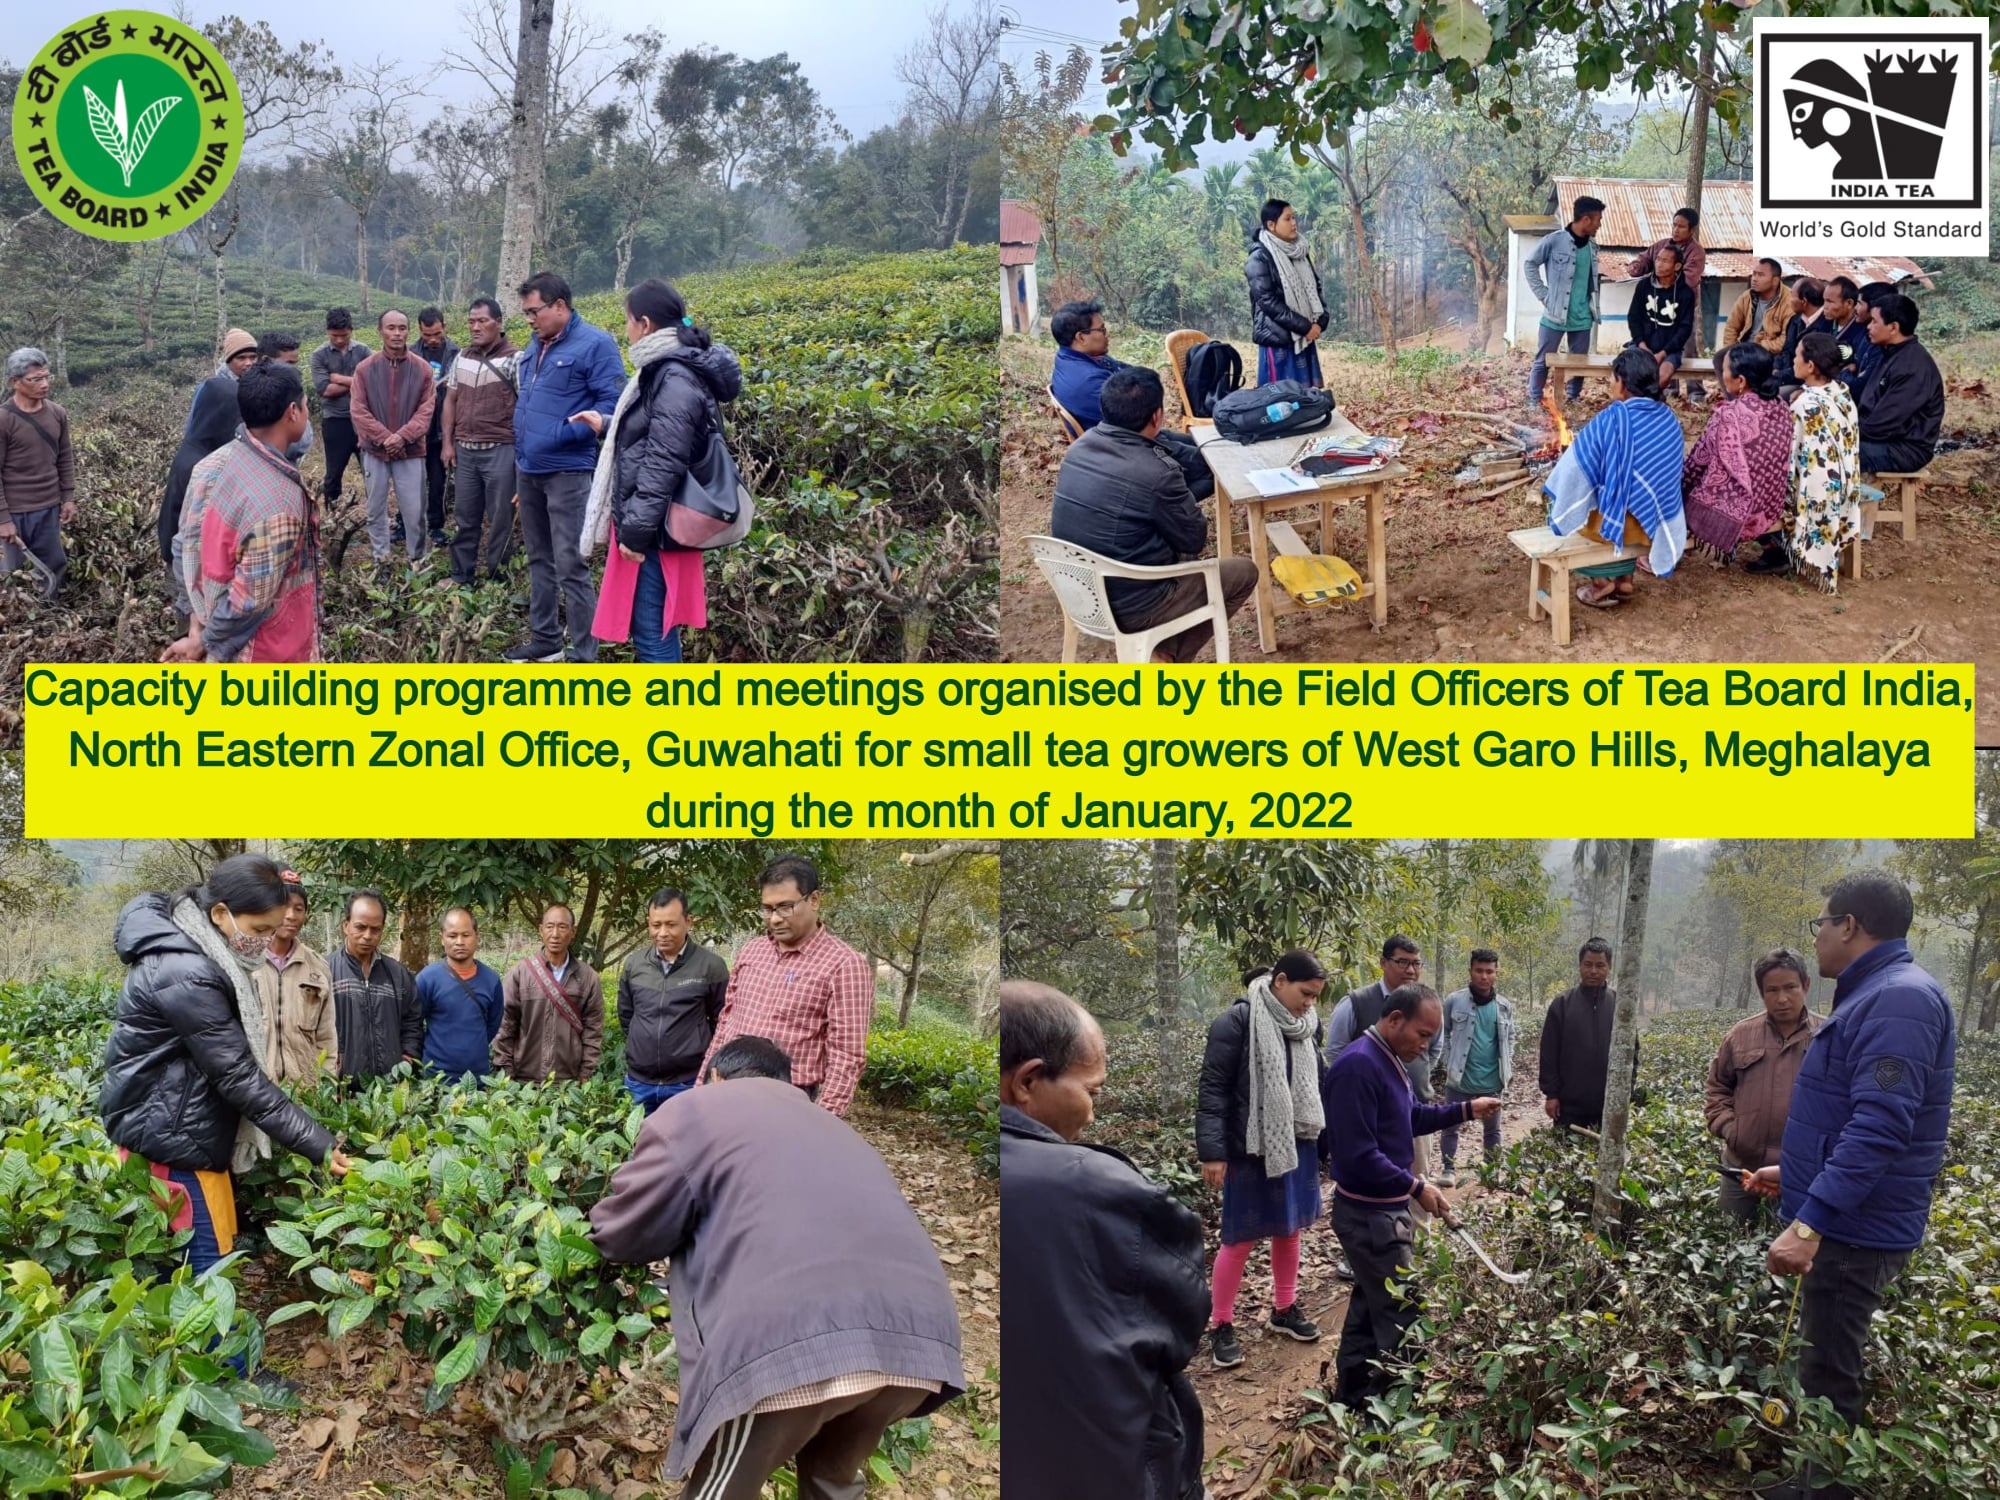 Capacity building programme and meetings organised by the Field Officers of Tea Board India, North Eastern Zonal Office, Guwahati for small tea growers of West Garo Hills, Meghalaya, January 2022